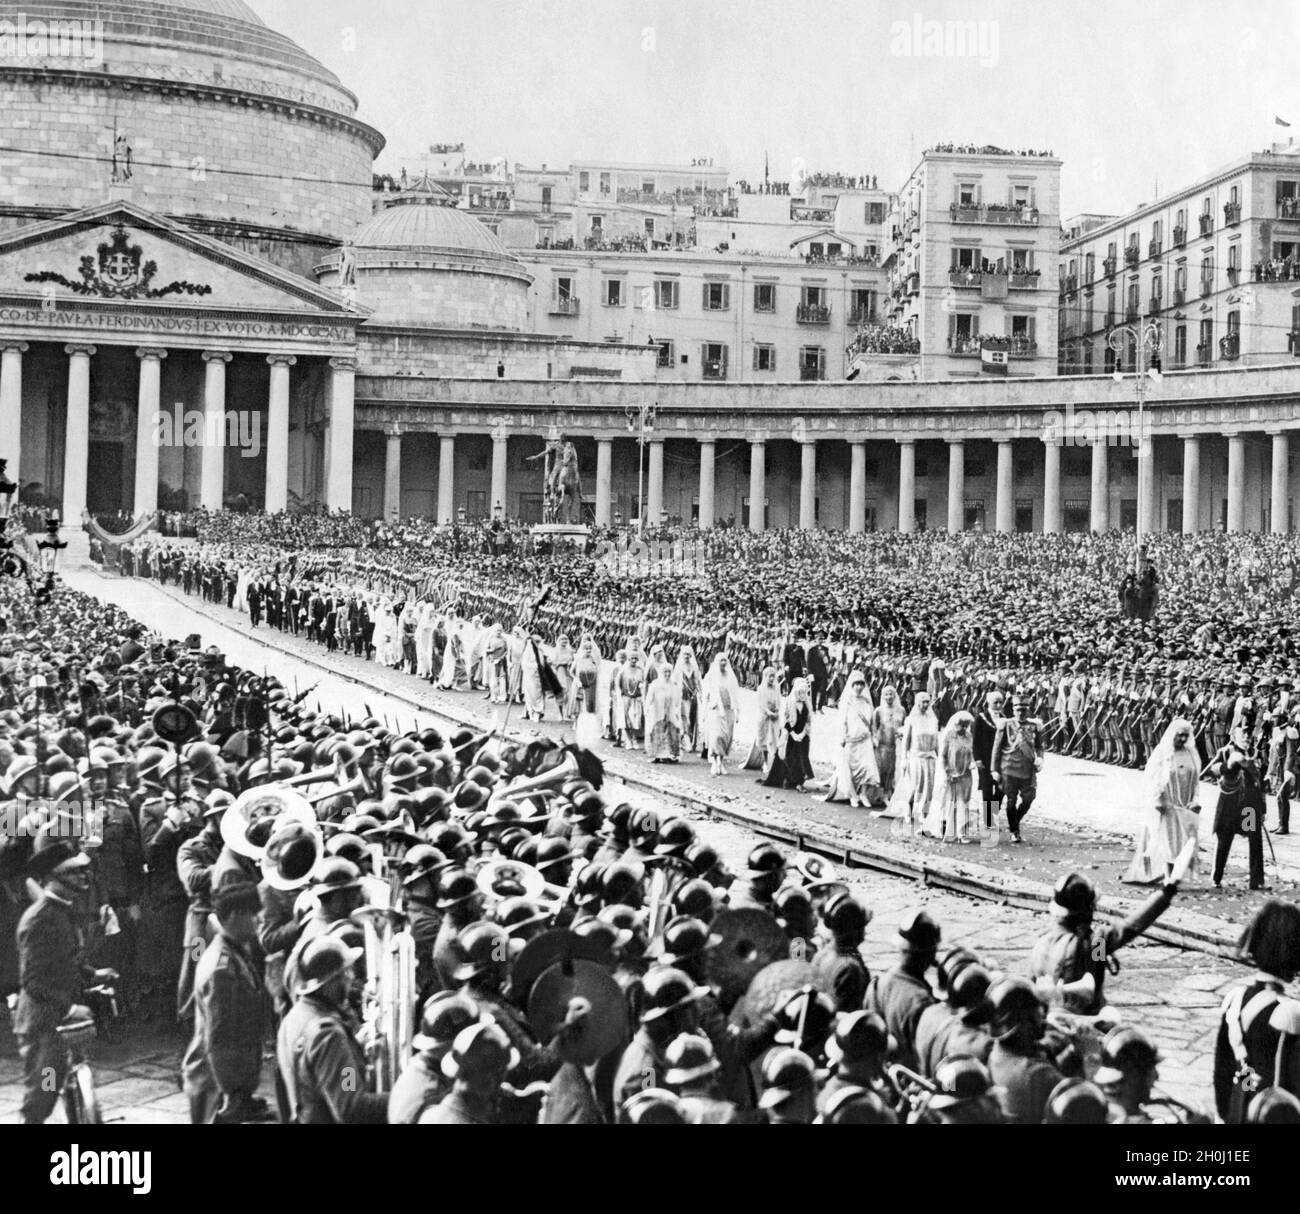 On 5 November 1927, the wedding of Amadeus of Savoy, Duke of Aosta, to Anna d'Orléans took place in the church of San Francesco di Paola (in the background) in Naples. In the picture, the wedding party is just leaving the church after the ceremony and striding across the Piazza del Plebiscito to the royal palace. In the square, thousands of curious people cheer the newlyweds. Grand Admiral Paolo Thaon di Revel walks ahead with his wife Irene (right). [automated translation] Stock Photo